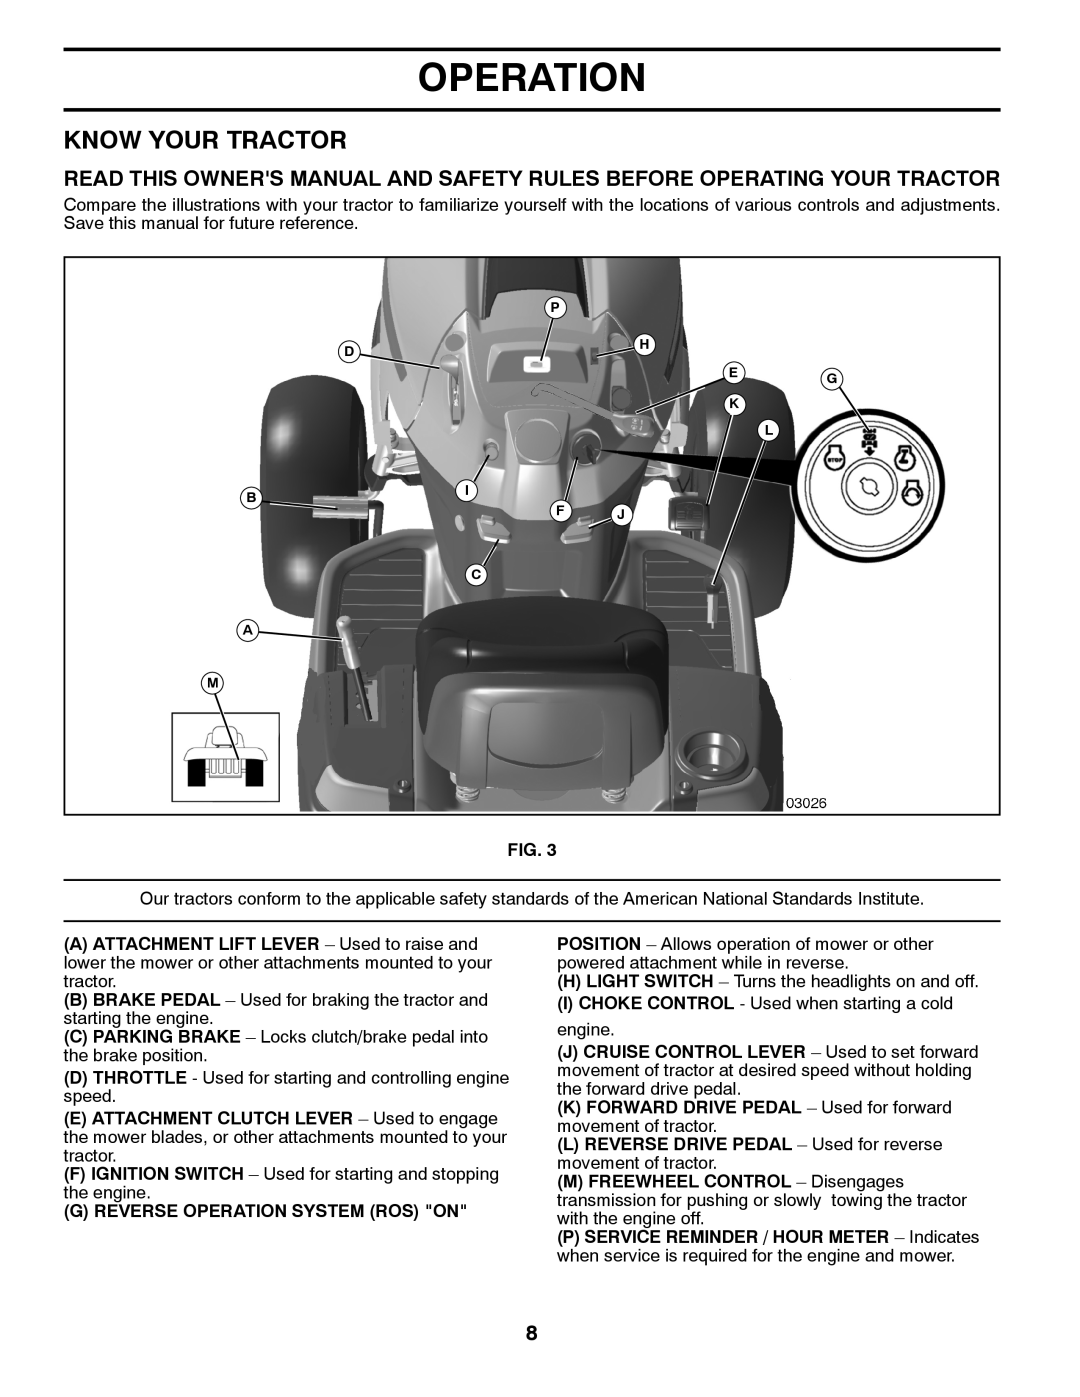 Husqvarna YTH2246 owner manual Know Your Tractor, G Reverse Operation System Ros On 